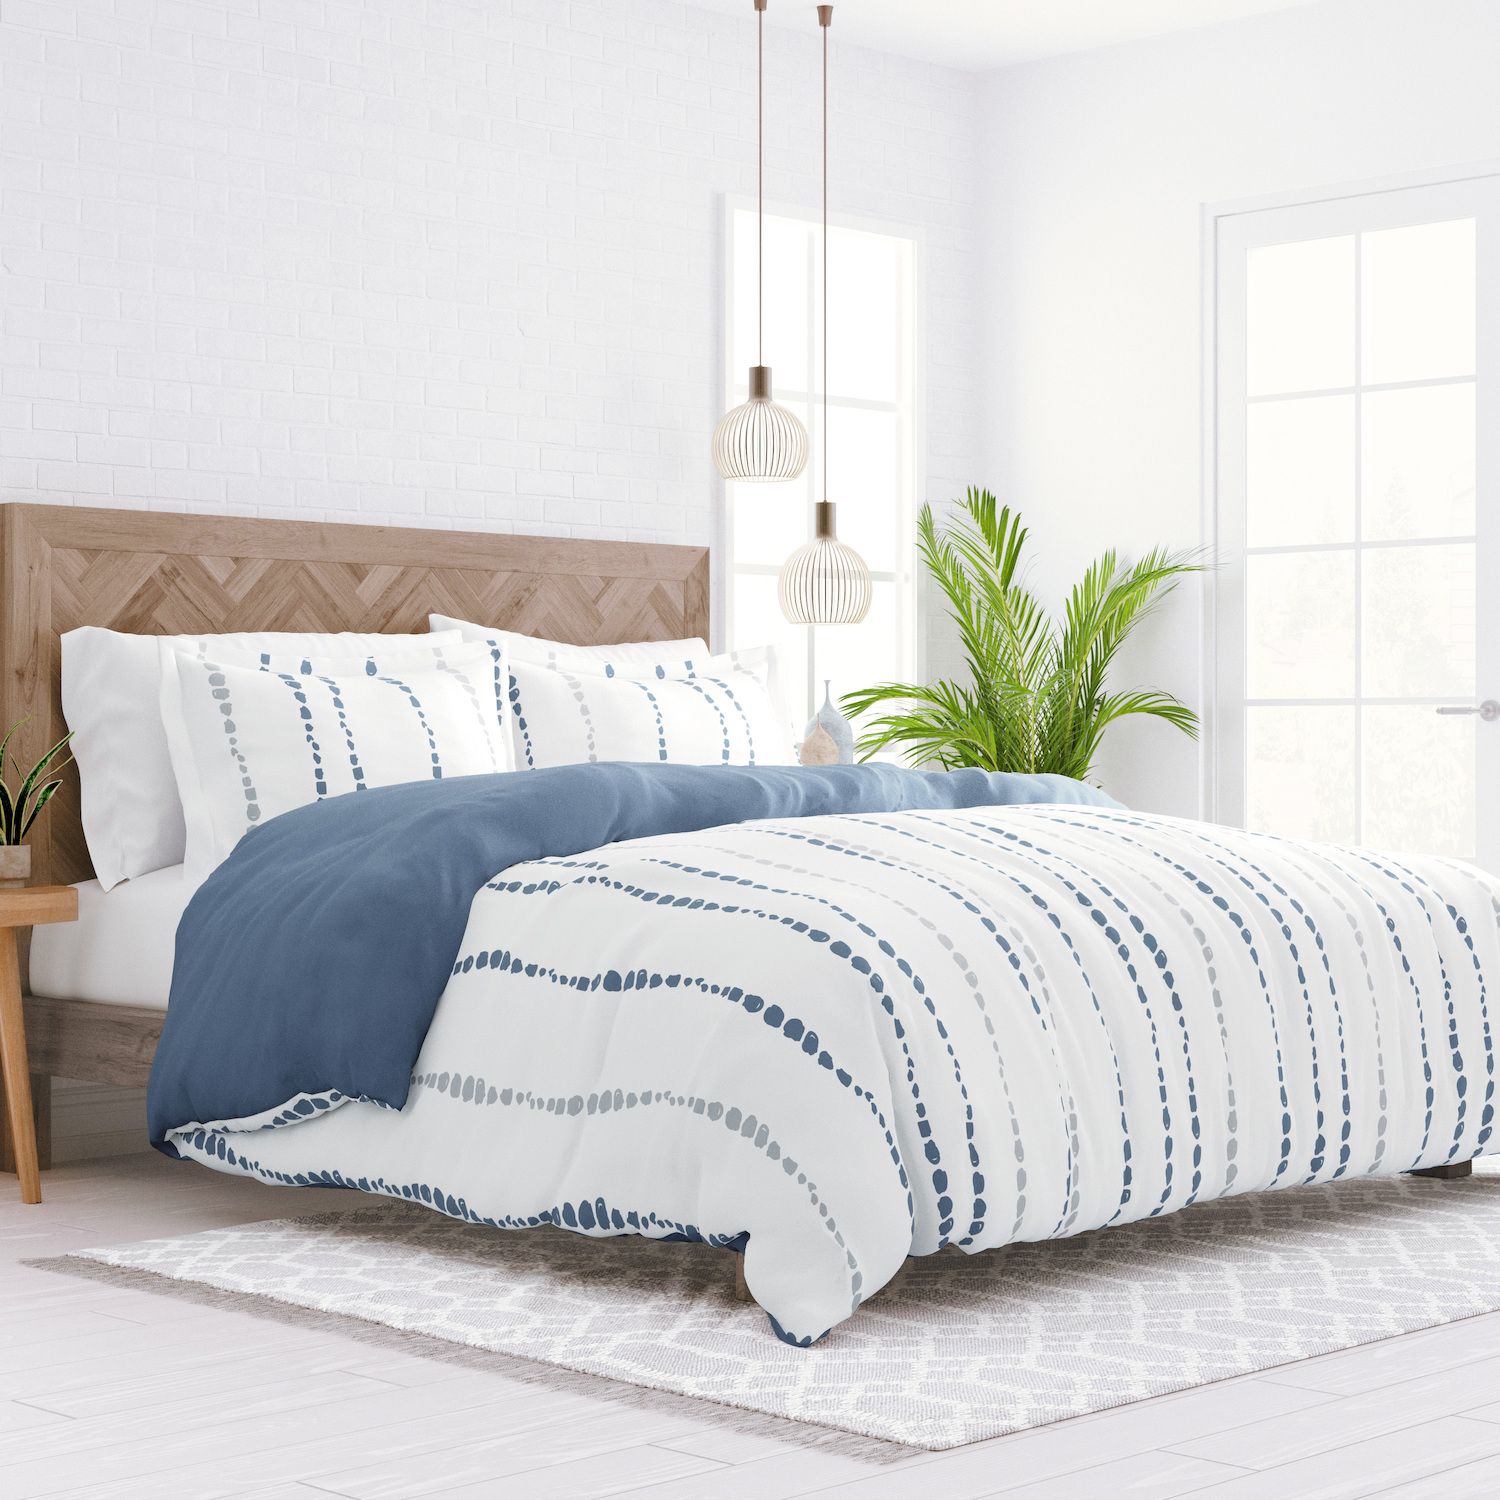 Image for Home Collection Premium Ultra Soft Urban Vibe Pattern Reversible Duvet Cover Set at Kohl's.